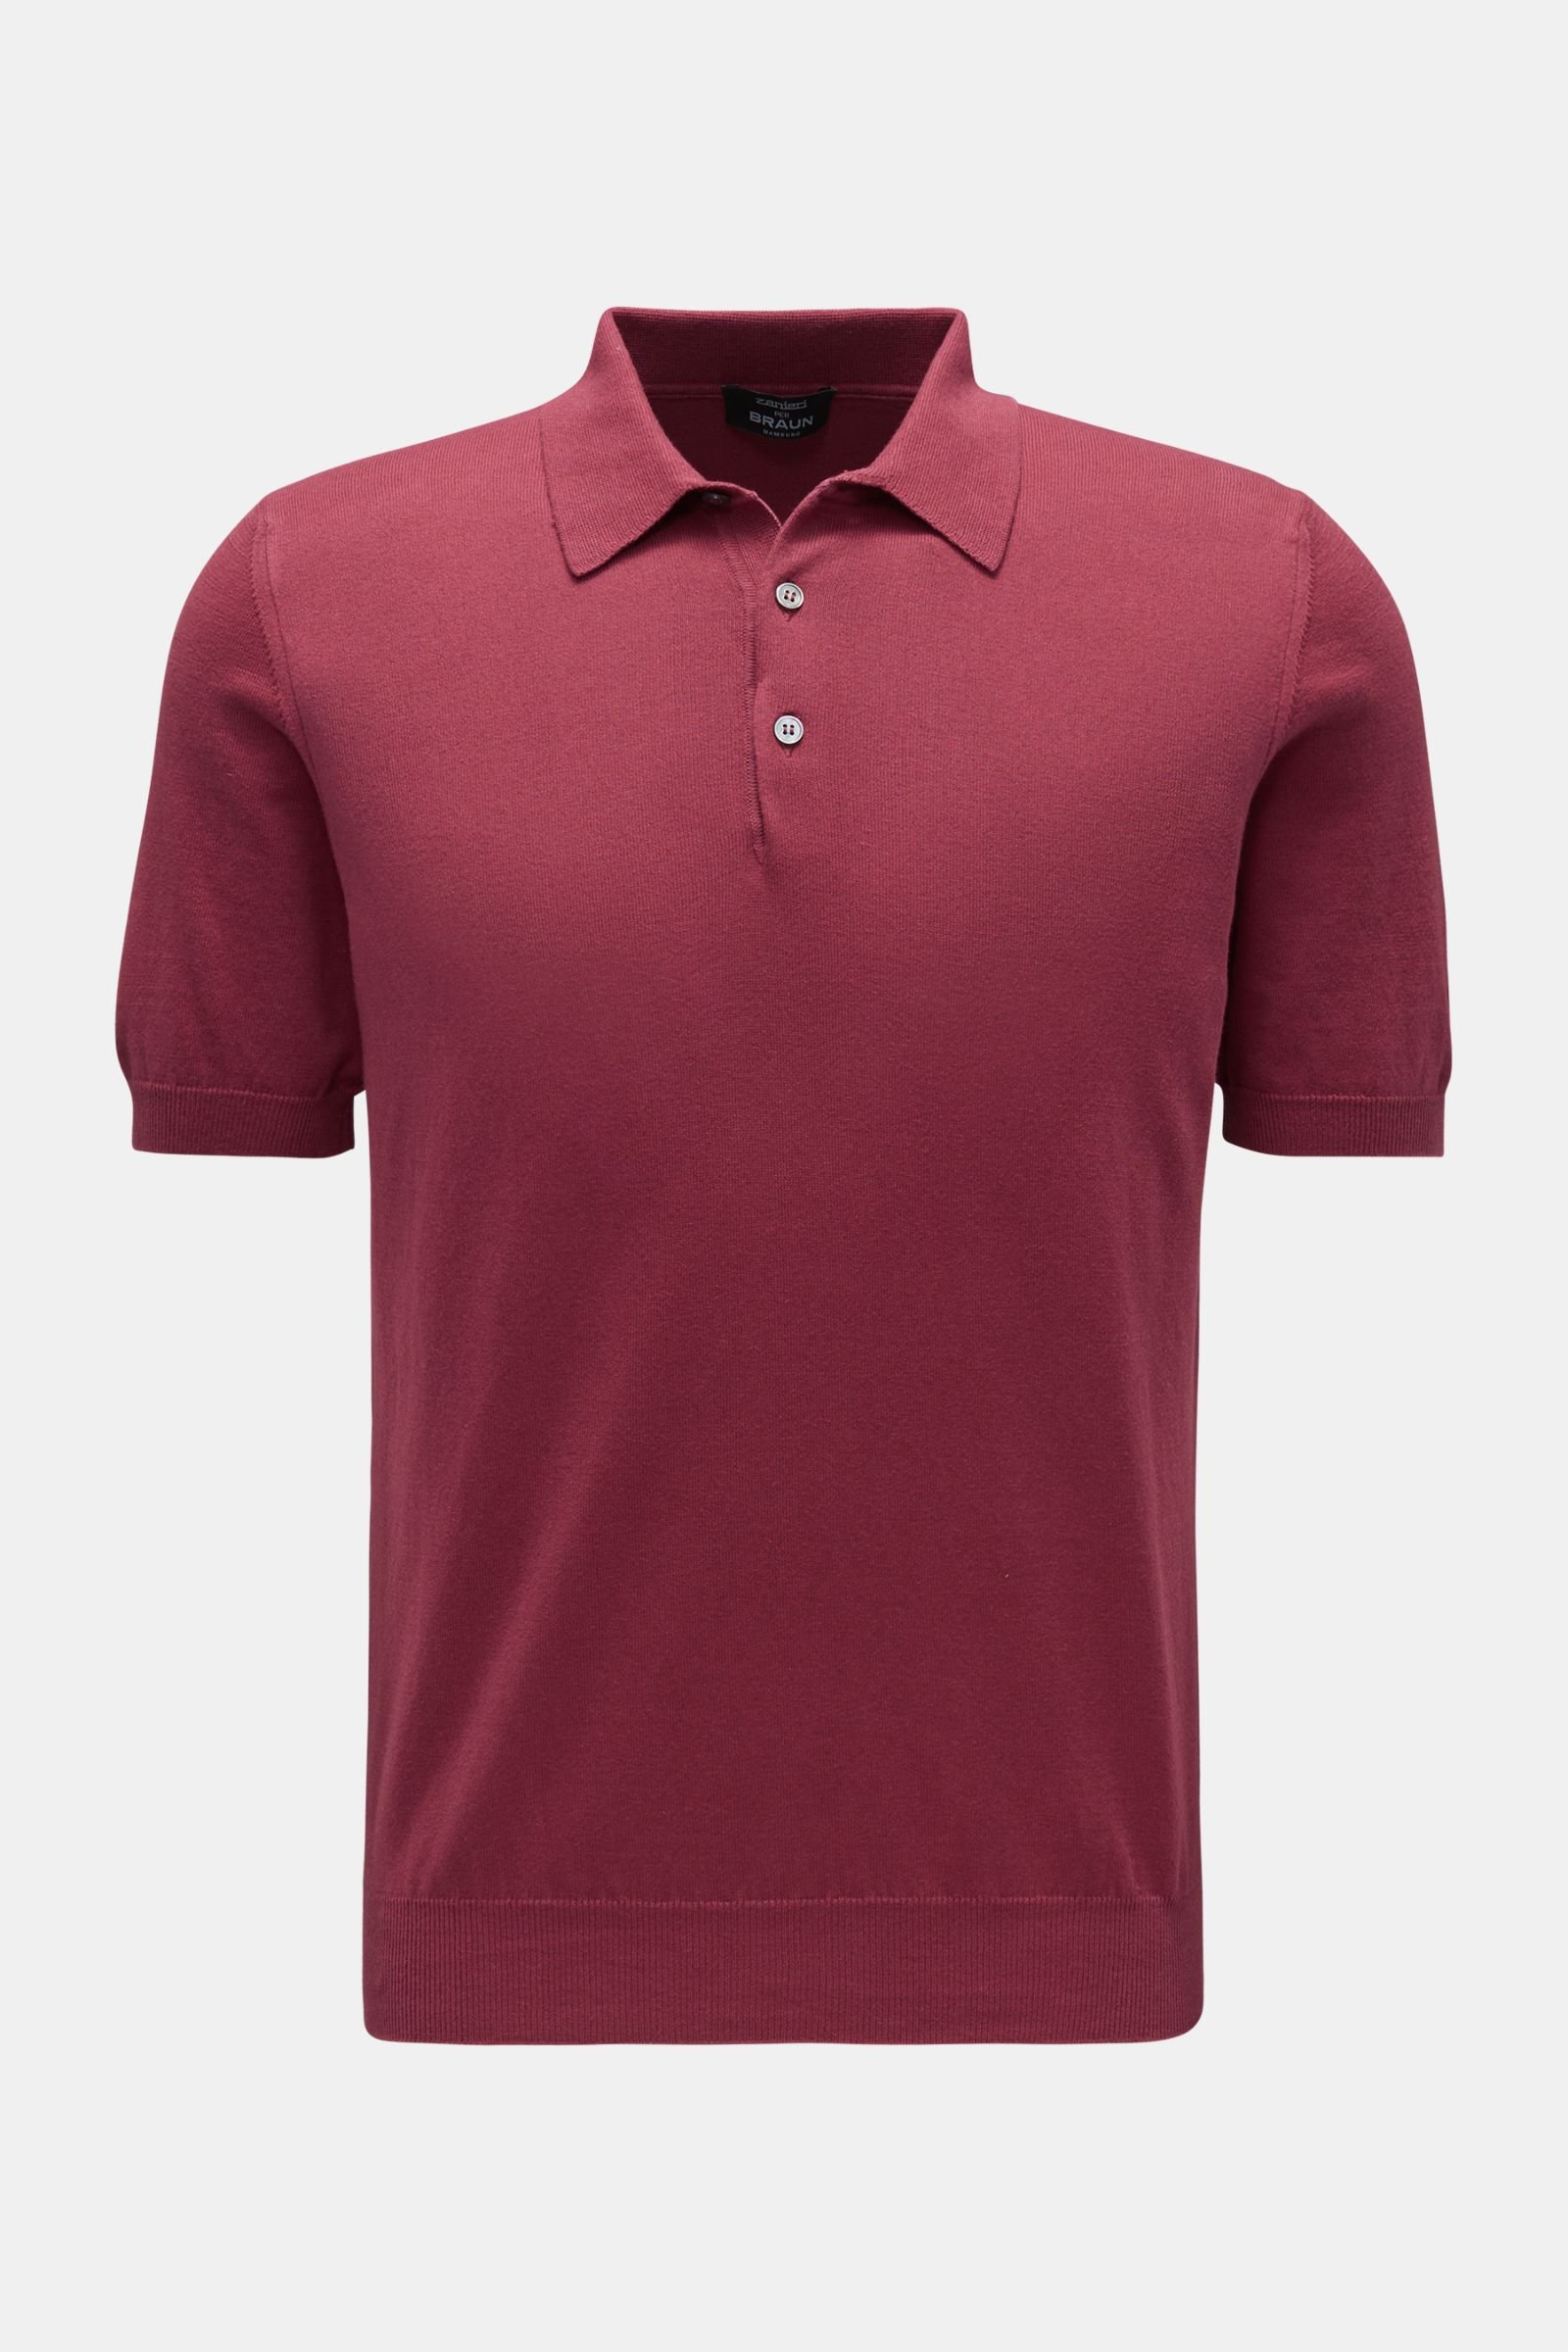 Short sleeve knit polo rust red